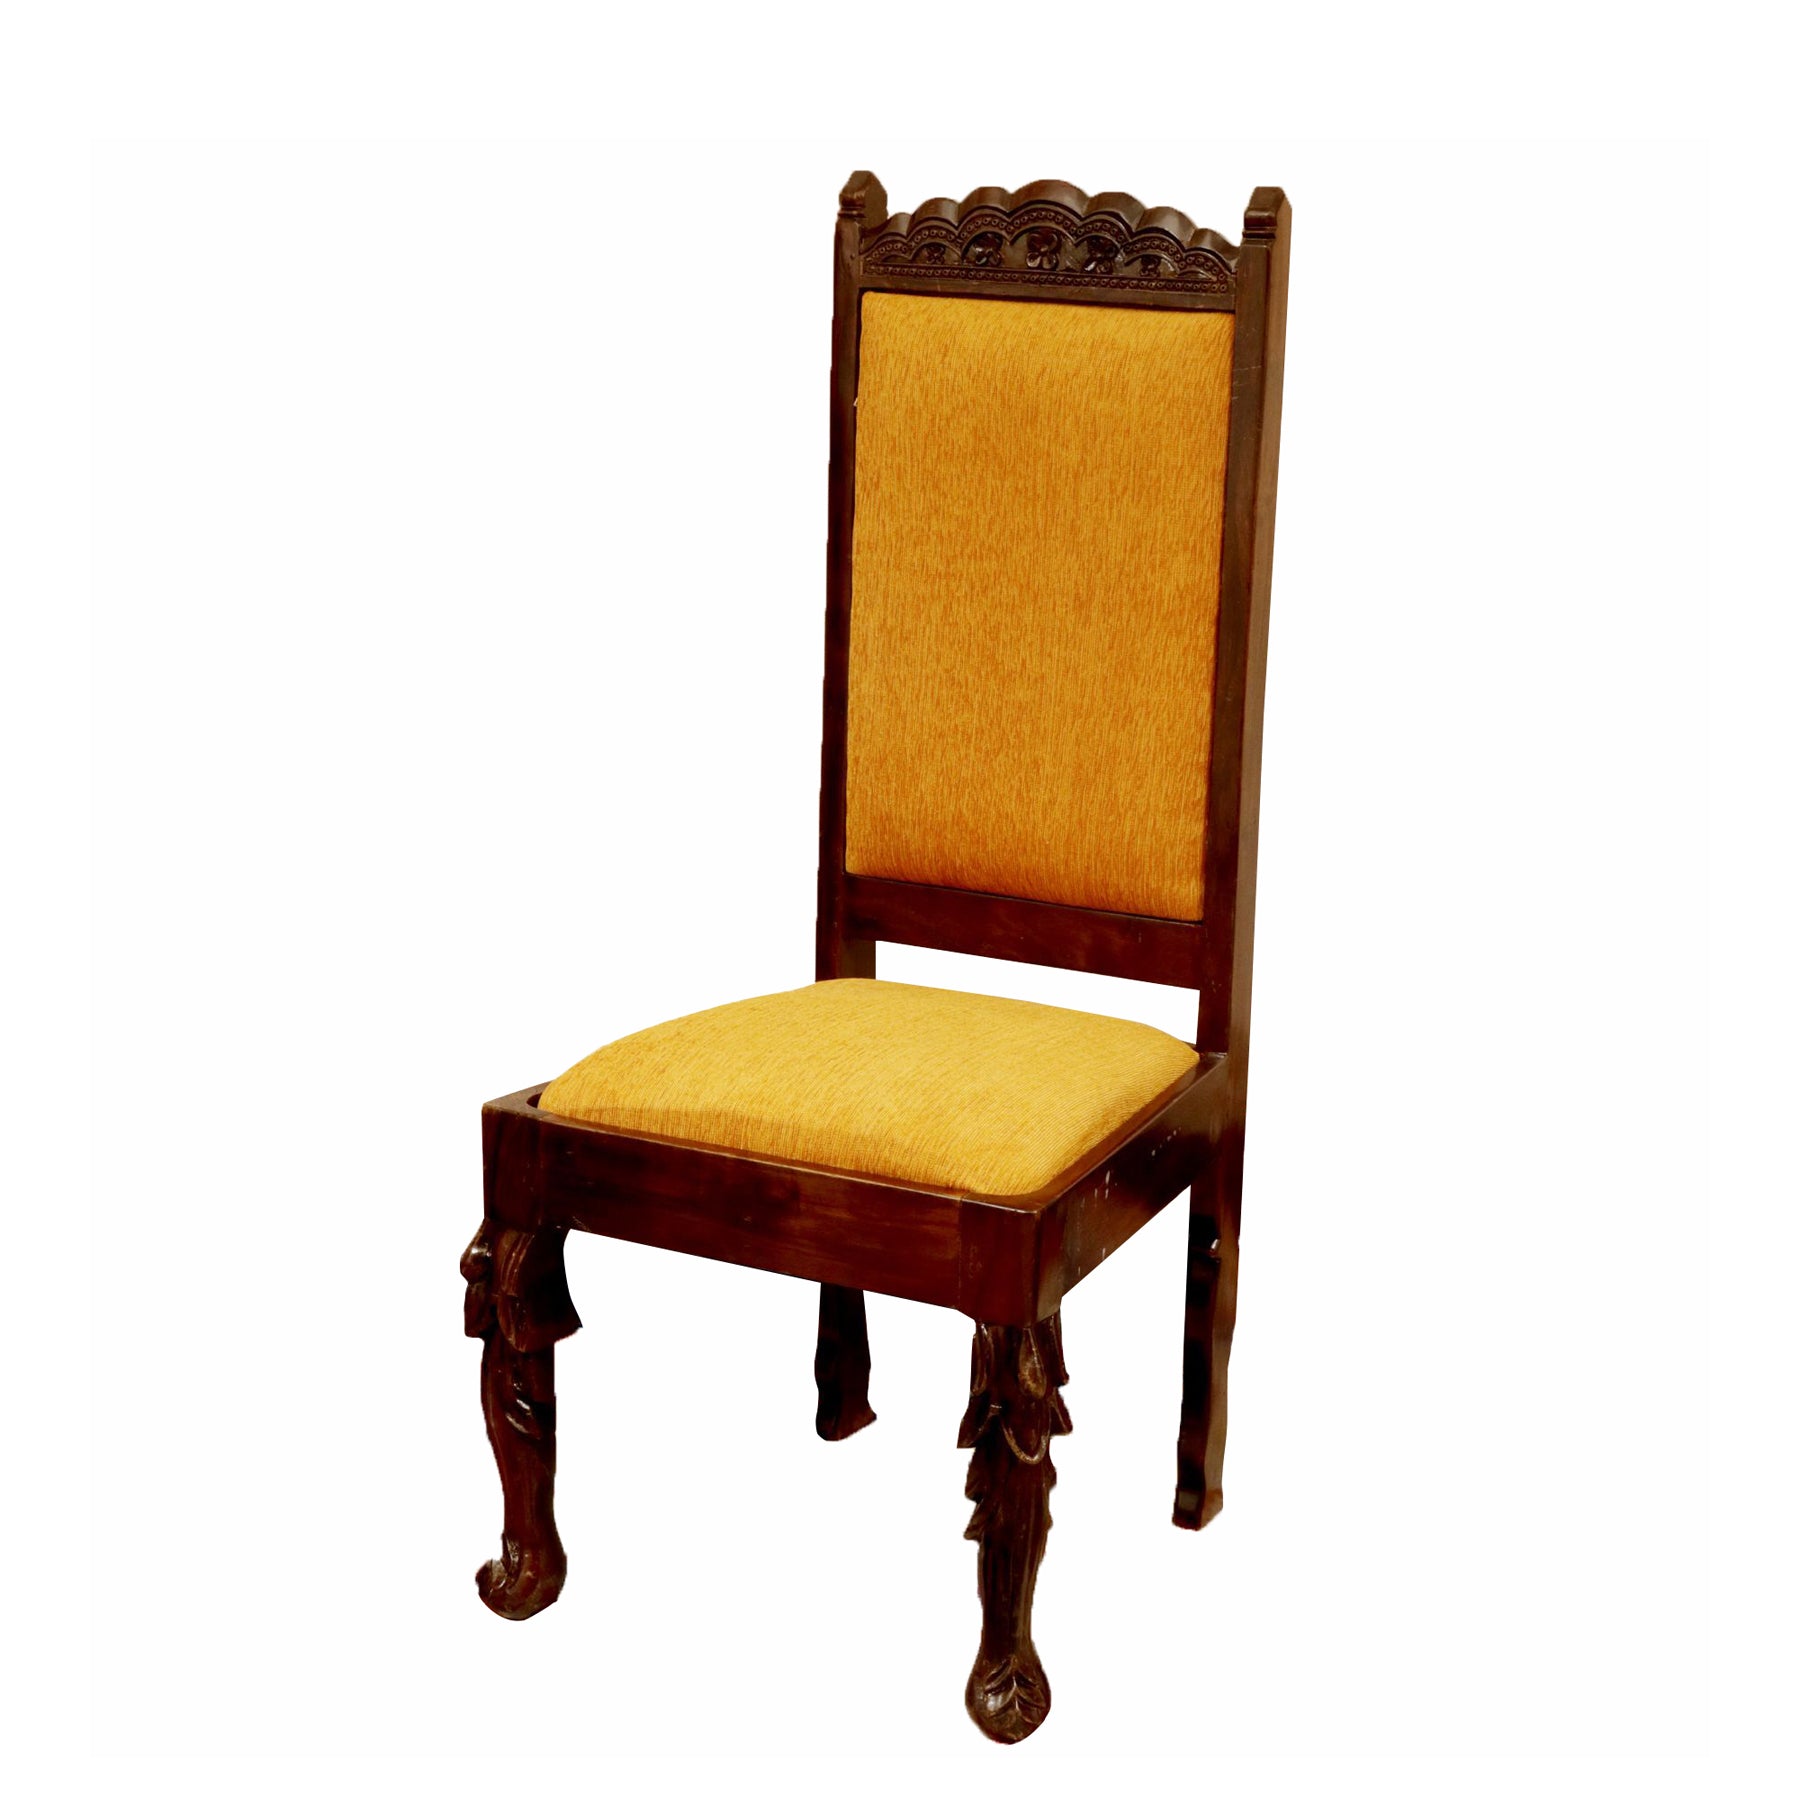 (Set of 2) Regal Style Chair Dining Chair